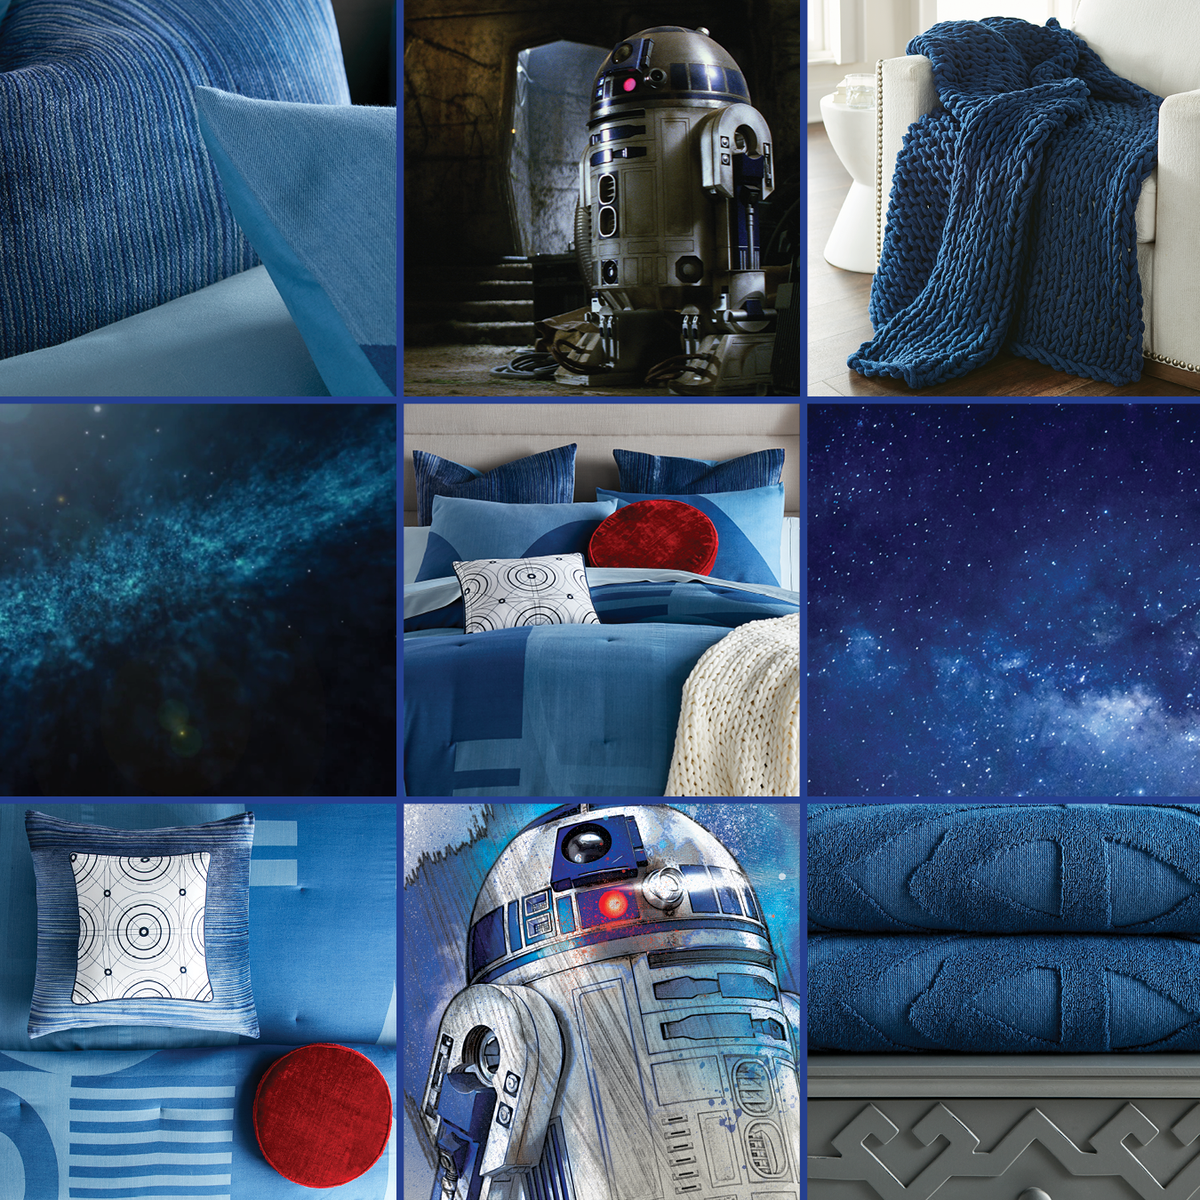 Sobel Westex Jedi ️ Decorative Pillows - Galaxy-Inspired Home Collection, Certified Oeko-Tex